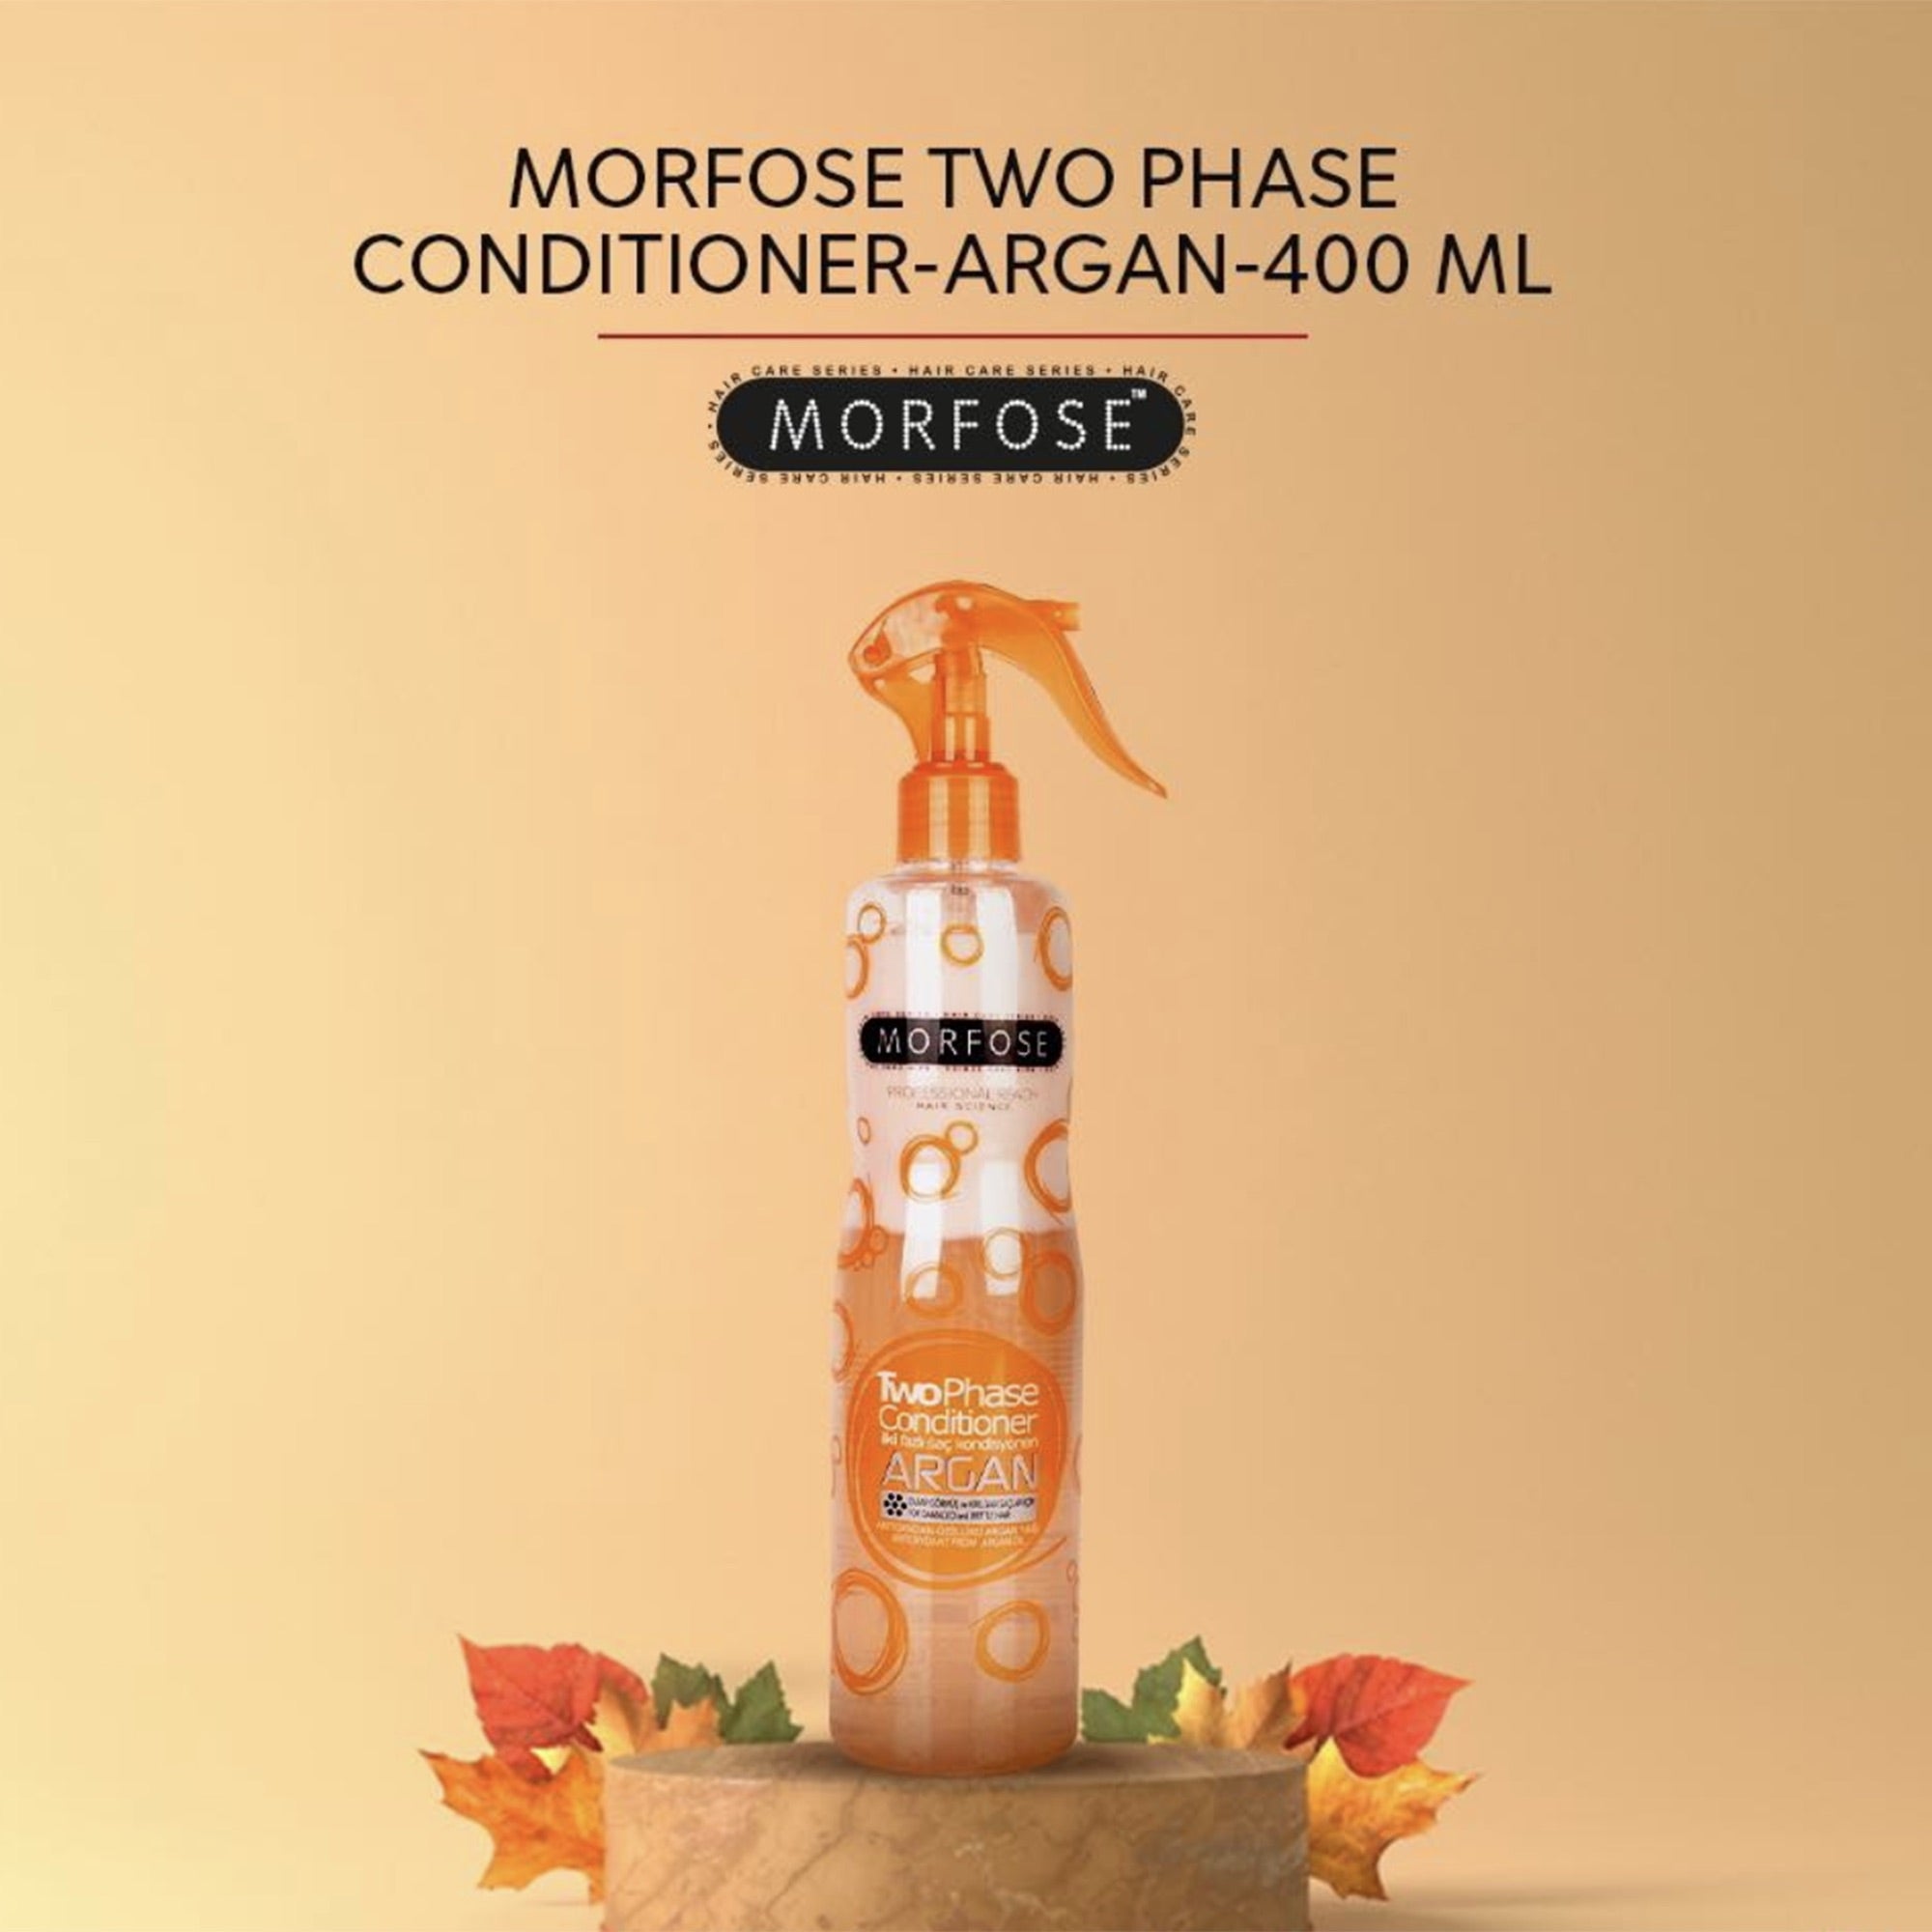 Morfose - Argan Two Phase Conditioner 400ml